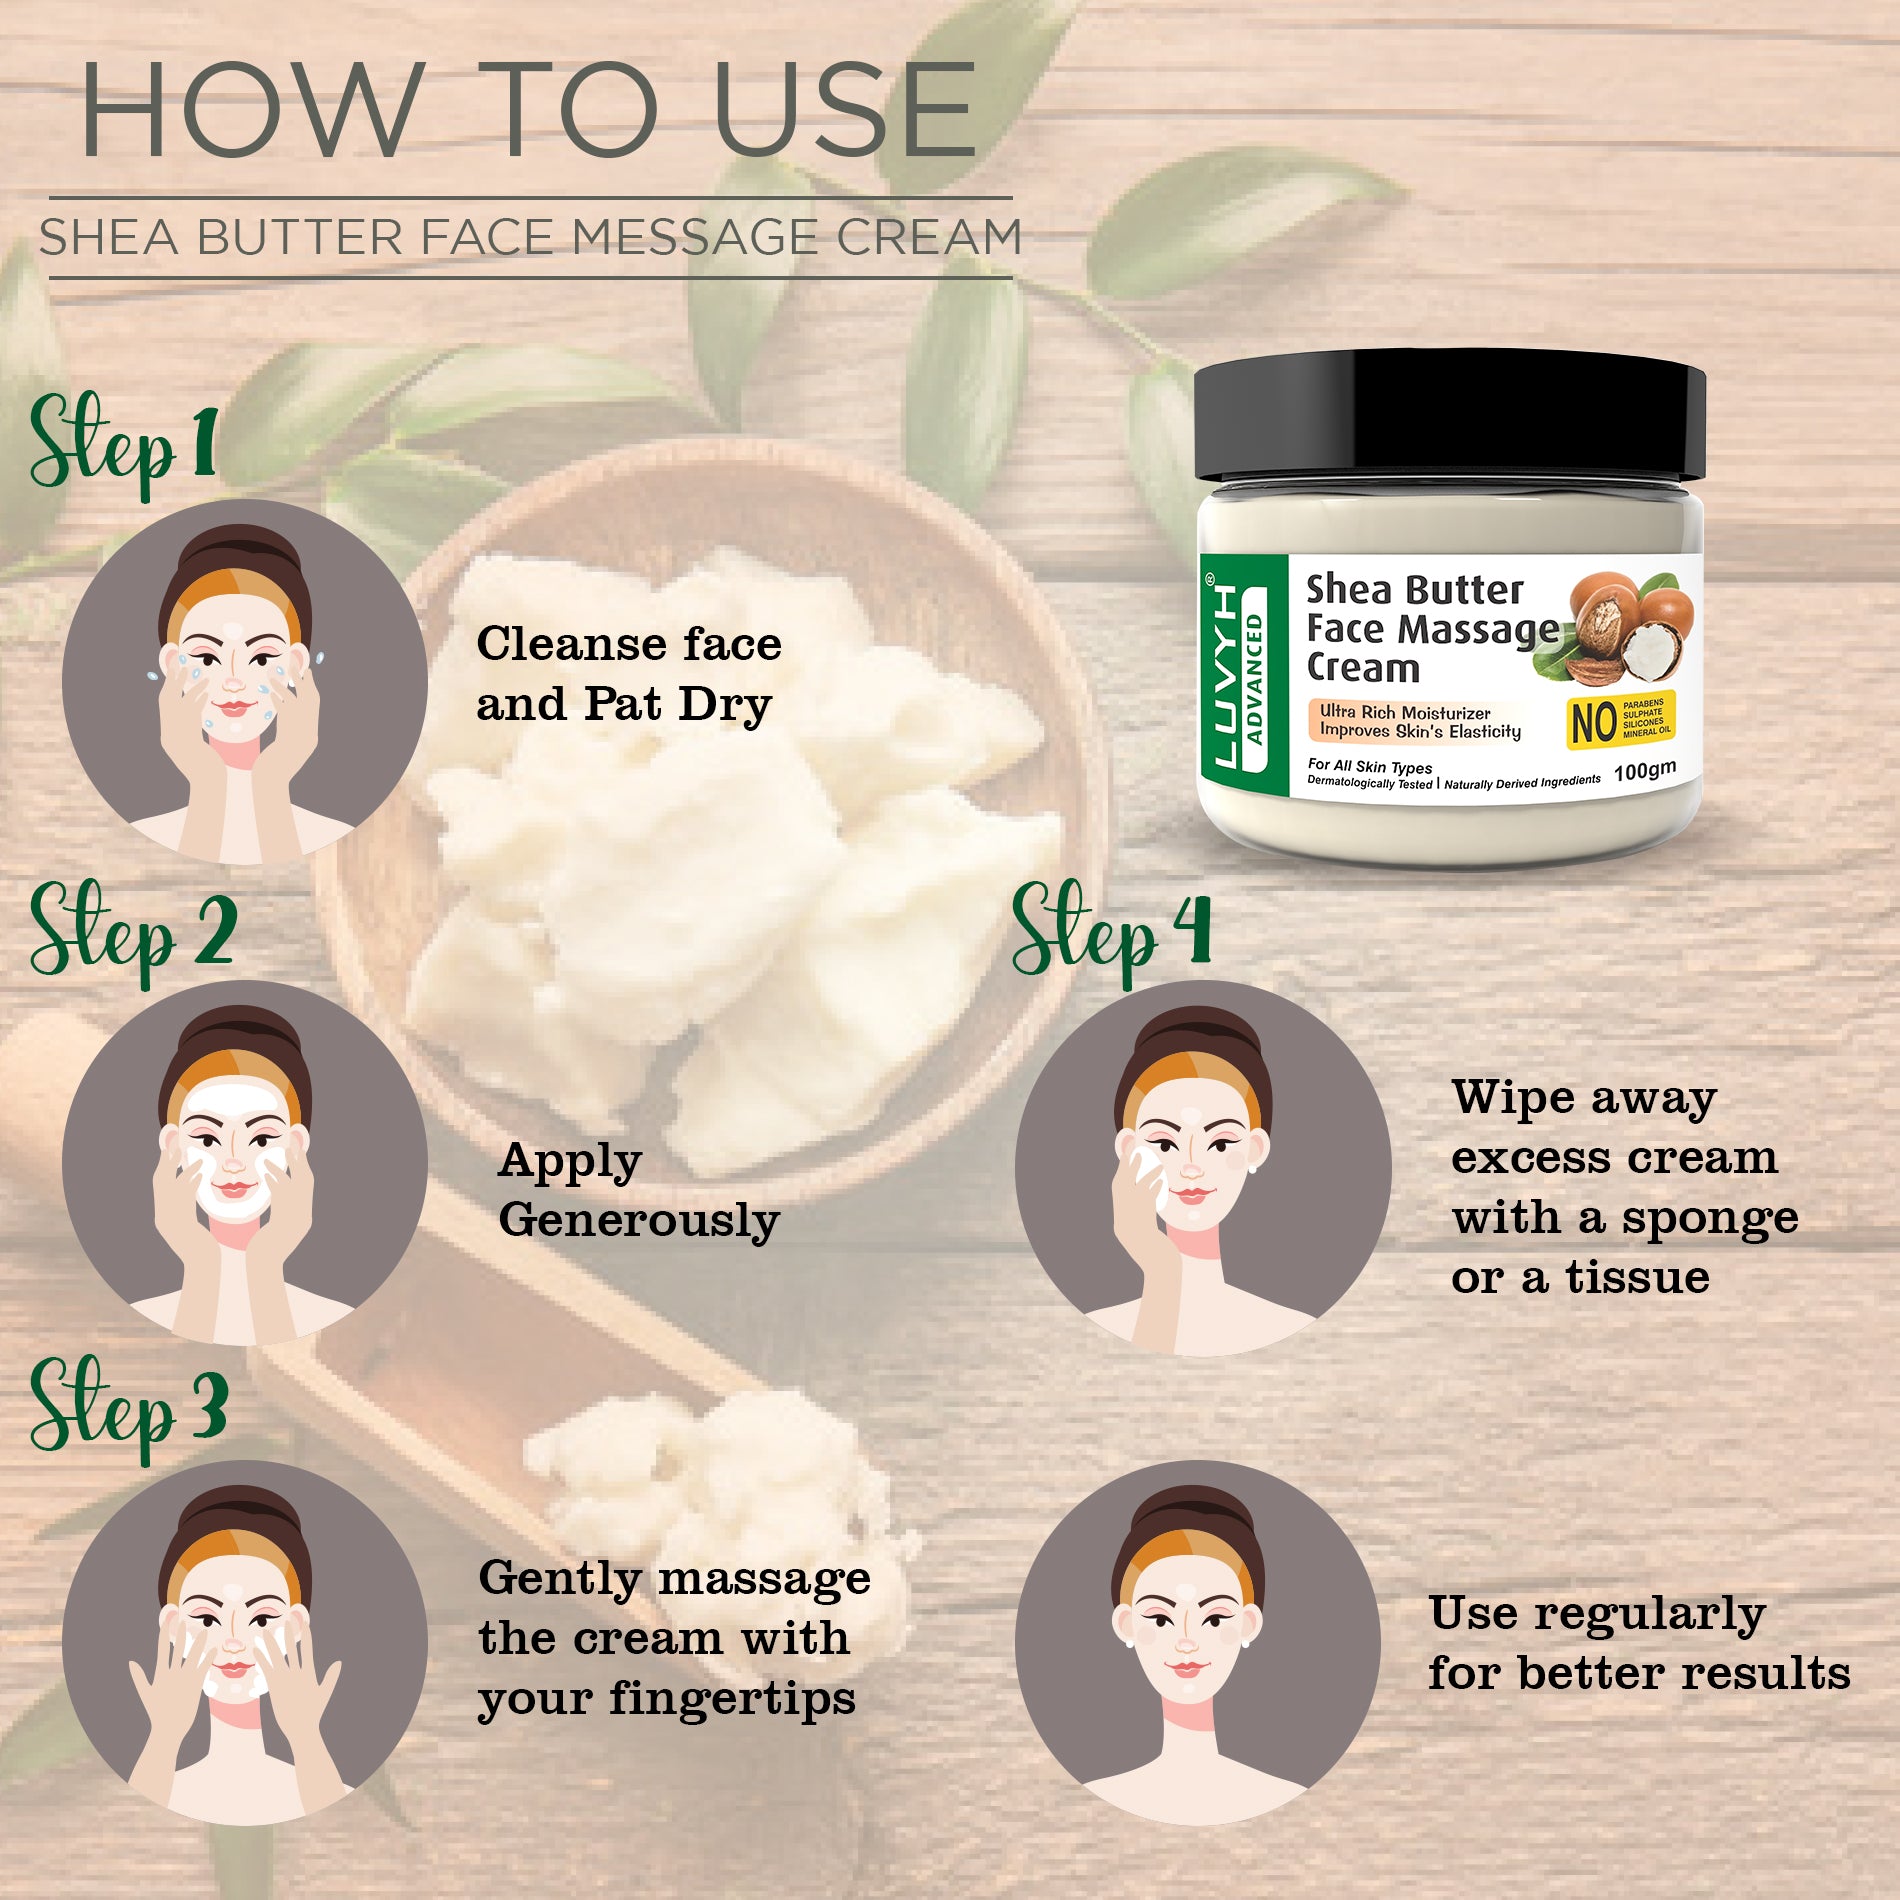 How to use of Shea Butter Face Massage Cream